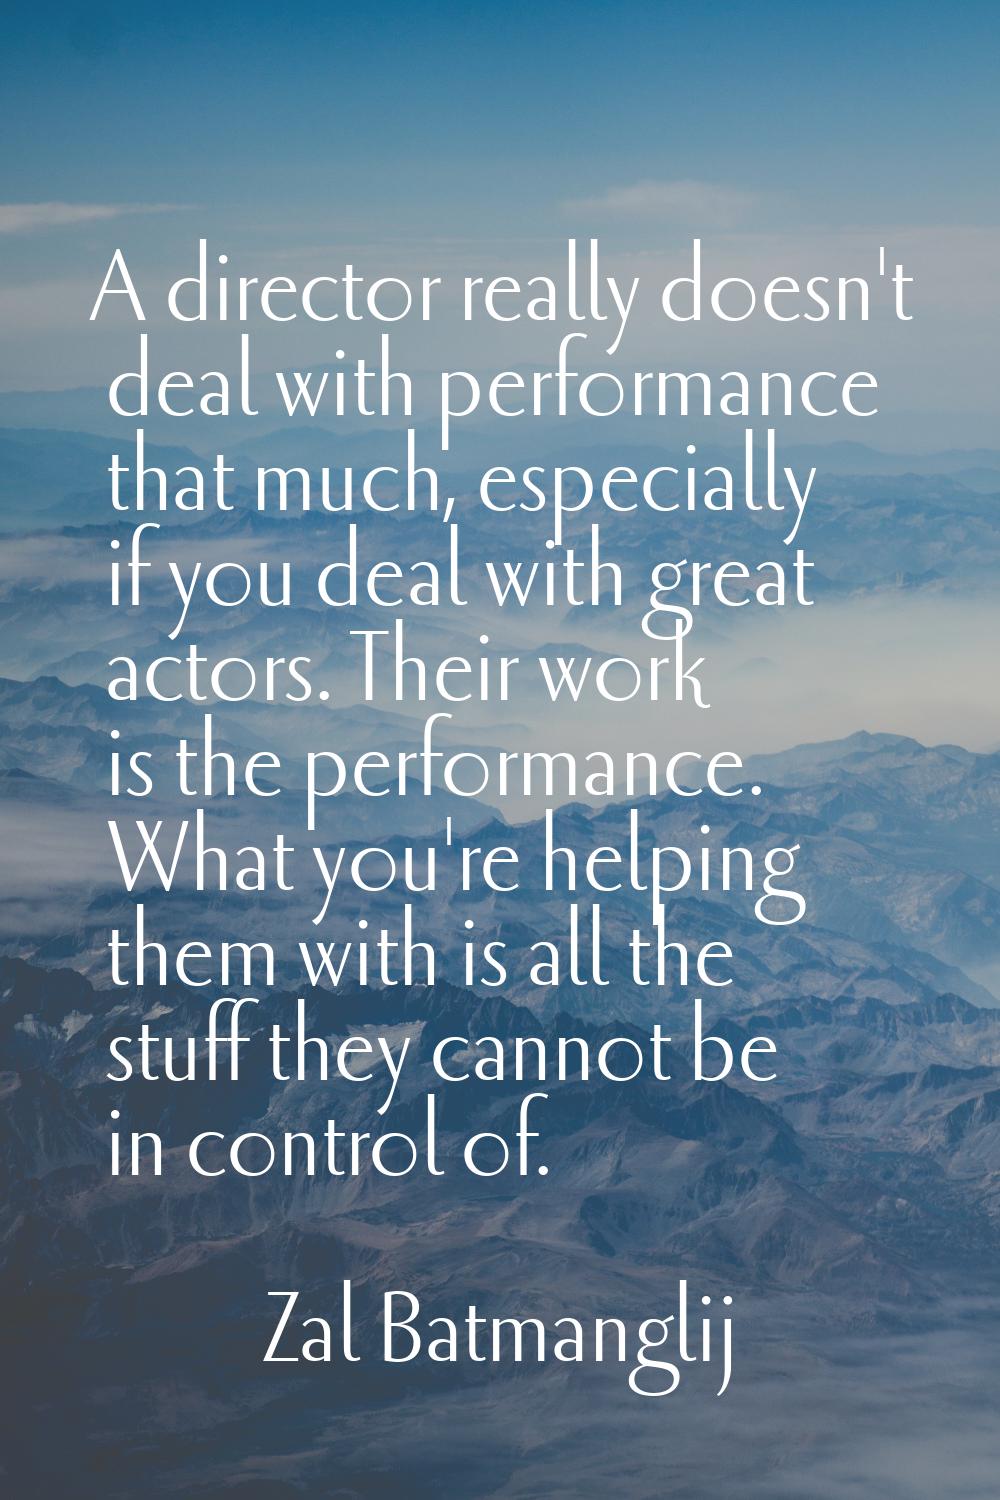 A director really doesn't deal with performance that much, especially if you deal with great actors